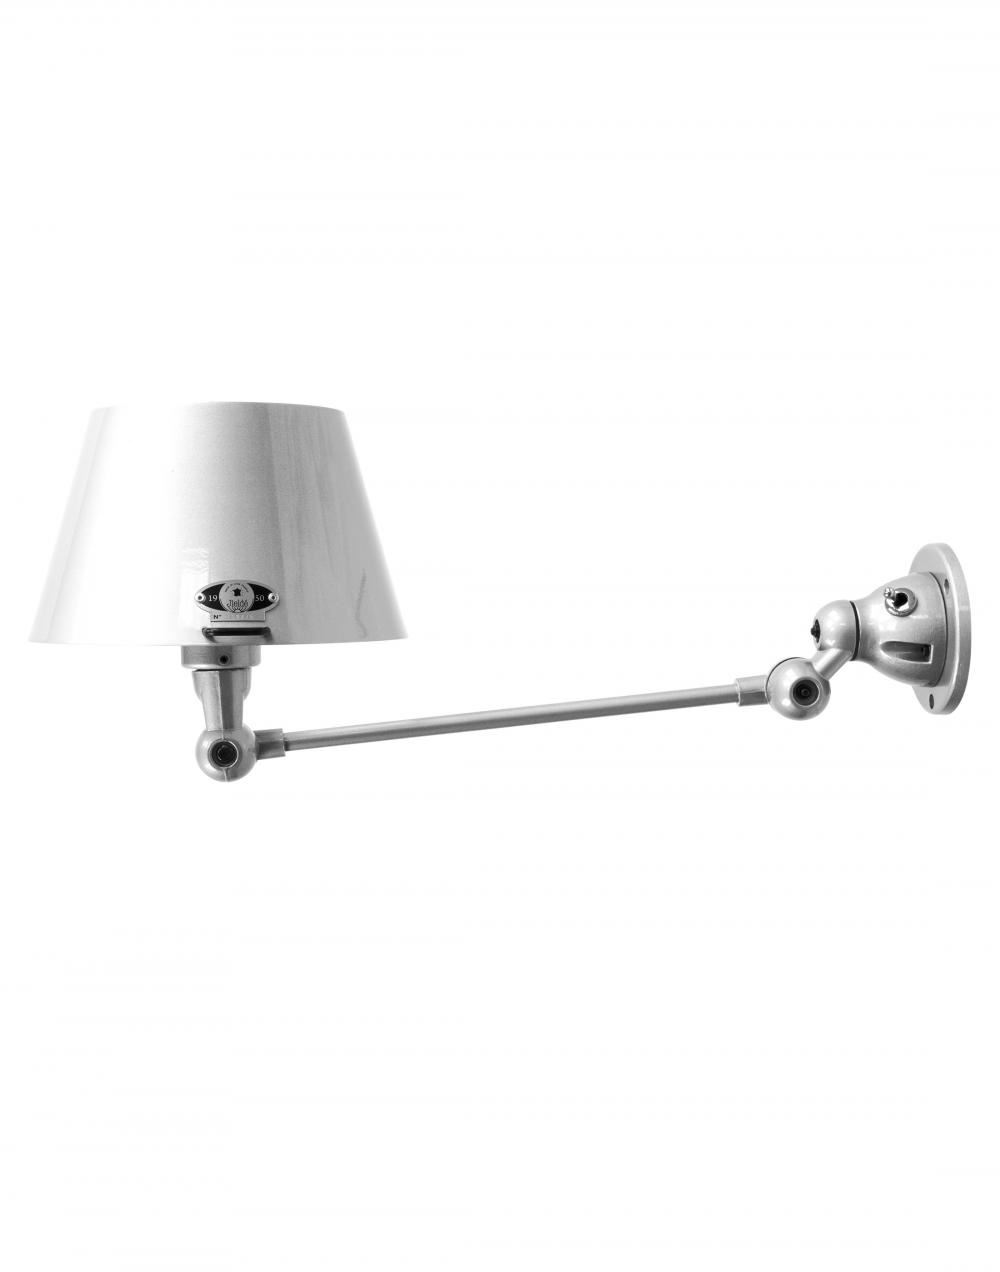 Jielde Aicler One Arm Adjustable Wall Light Straight Shade Polished Chrome Integral Switch On Wall Base